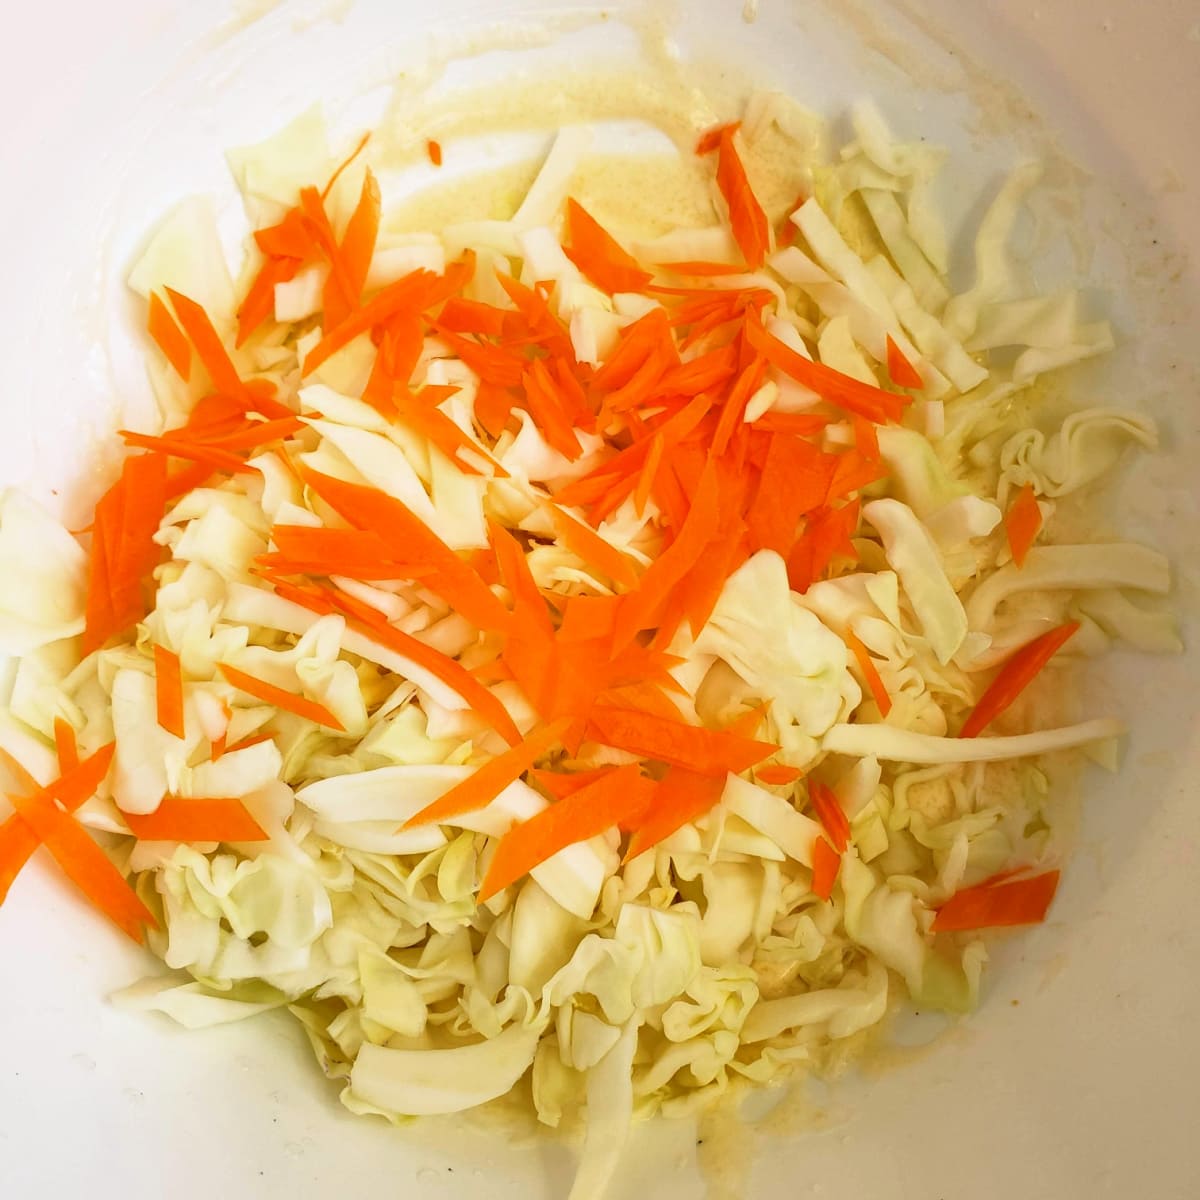 Carrots and cabbage in a mixing bowl on ShockinglyDelicious.com